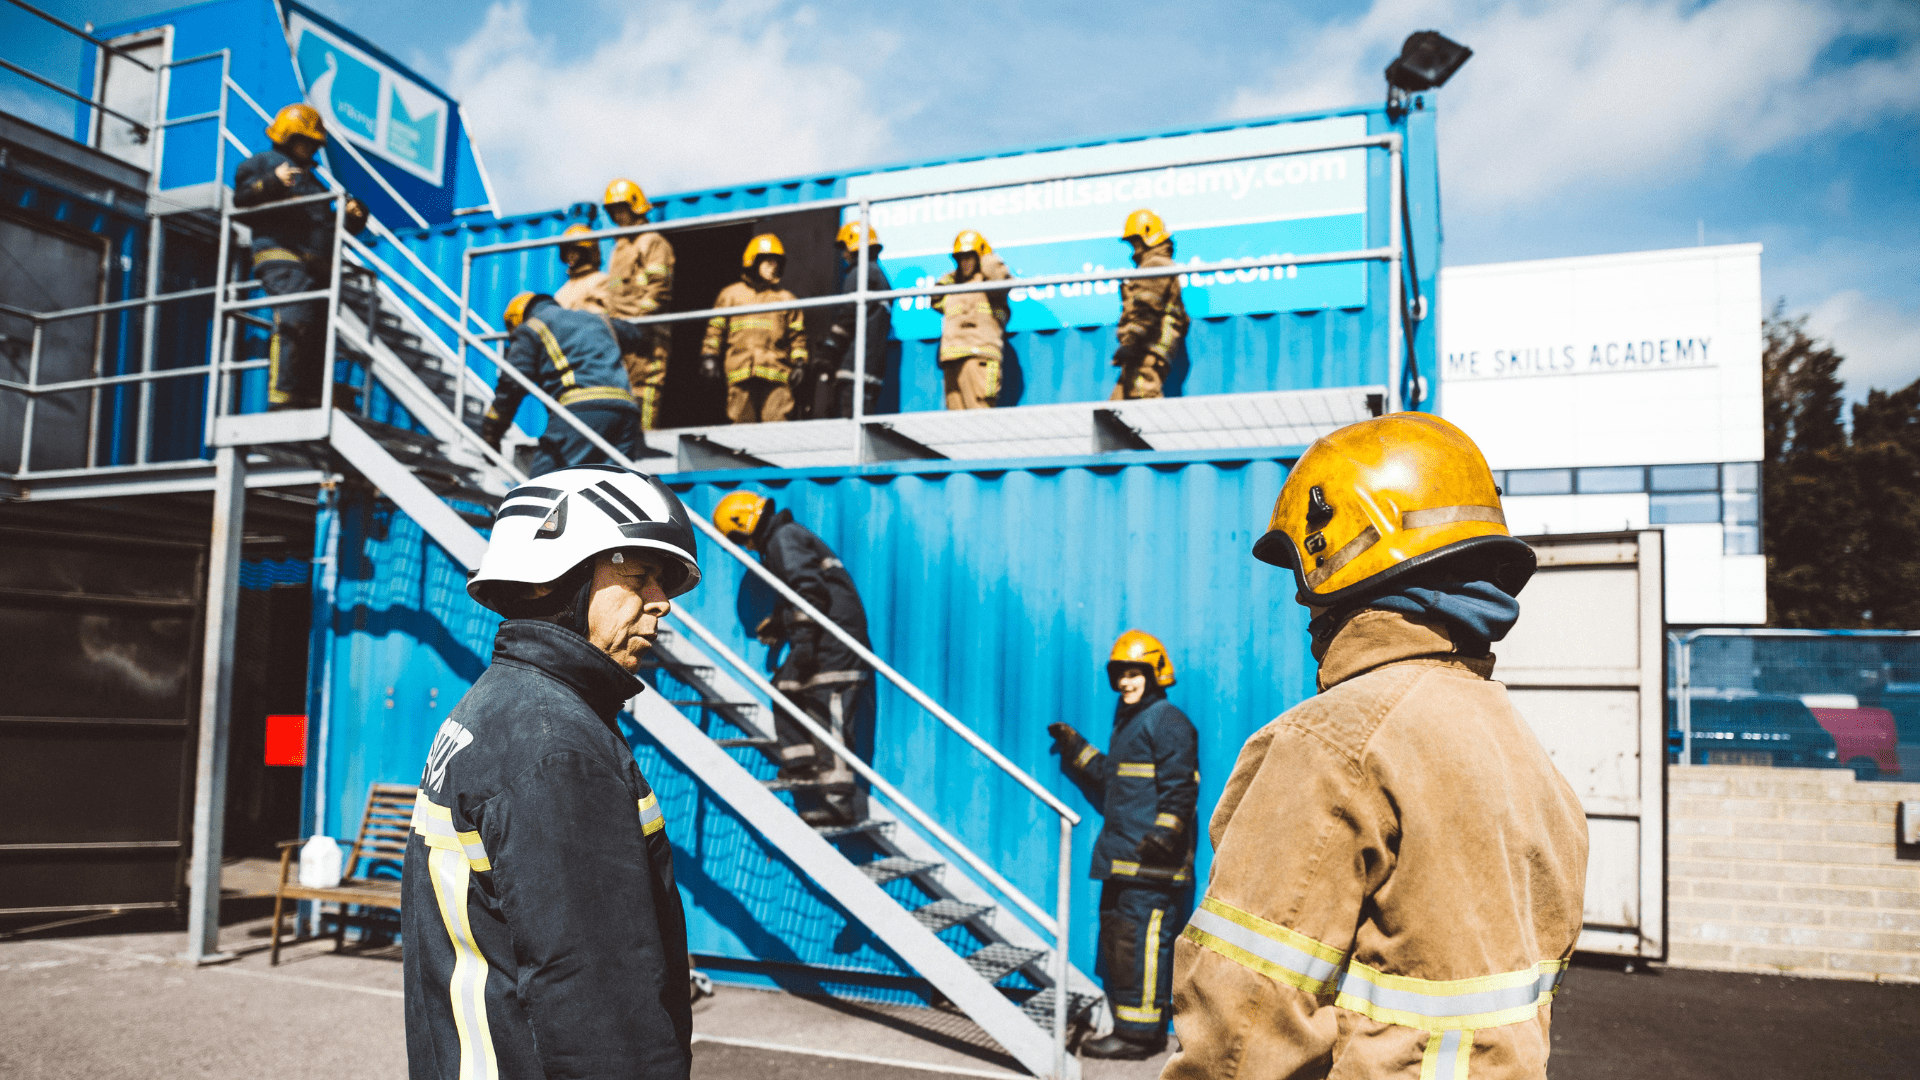 Operational Fire Fighting Training Maritime Skills Academy Dover